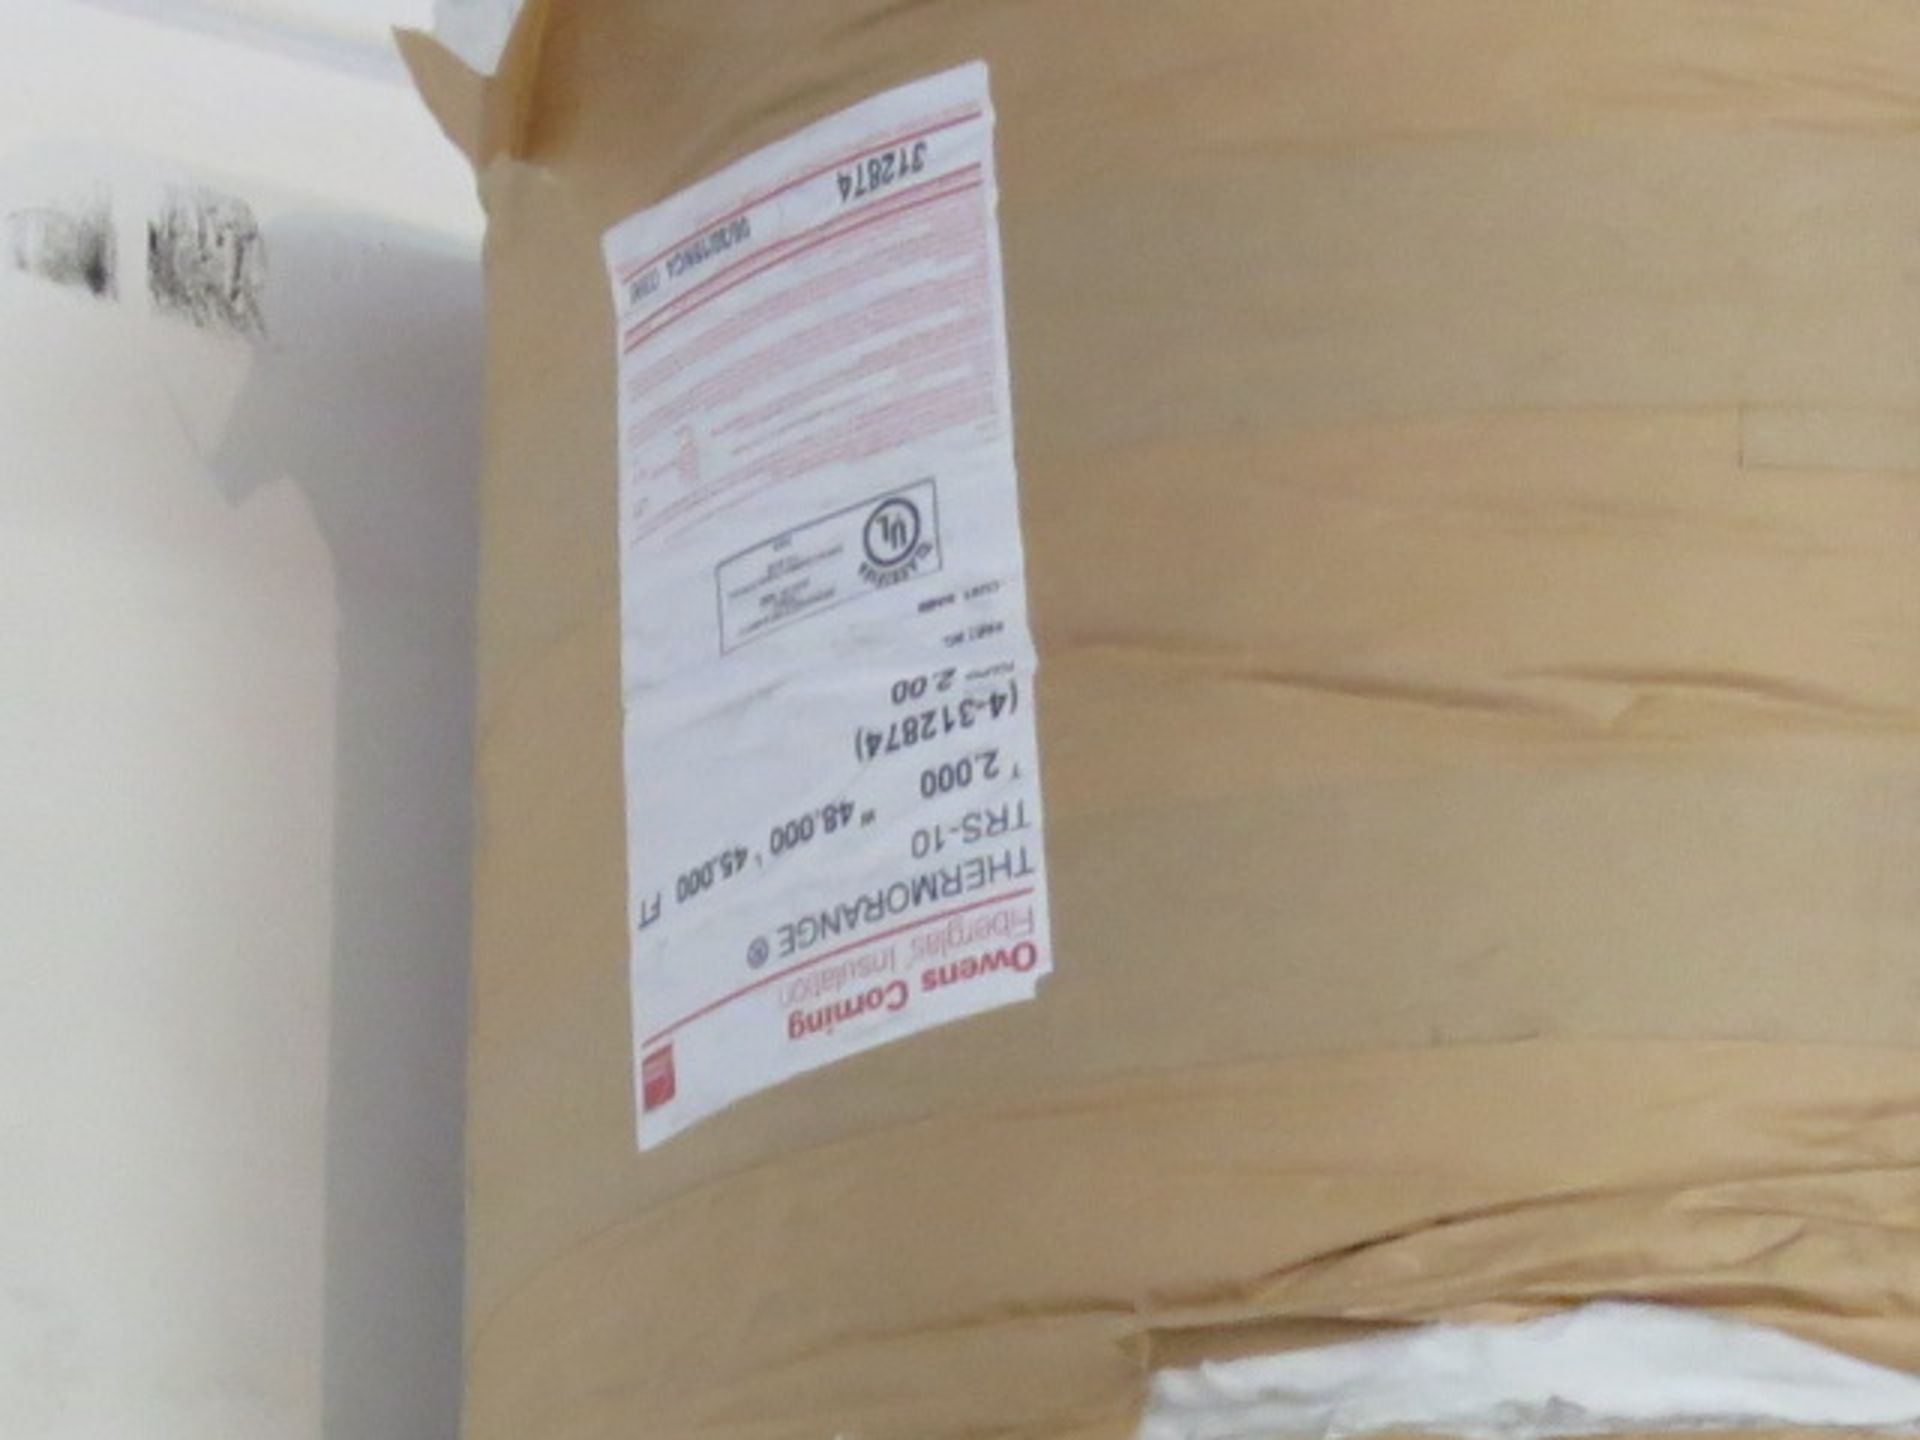 Large Quantity of Roxul “Superwool” SW PLUS, ProRox SL930NA and MOD R High Temperature Insulation. - Image 16 of 23